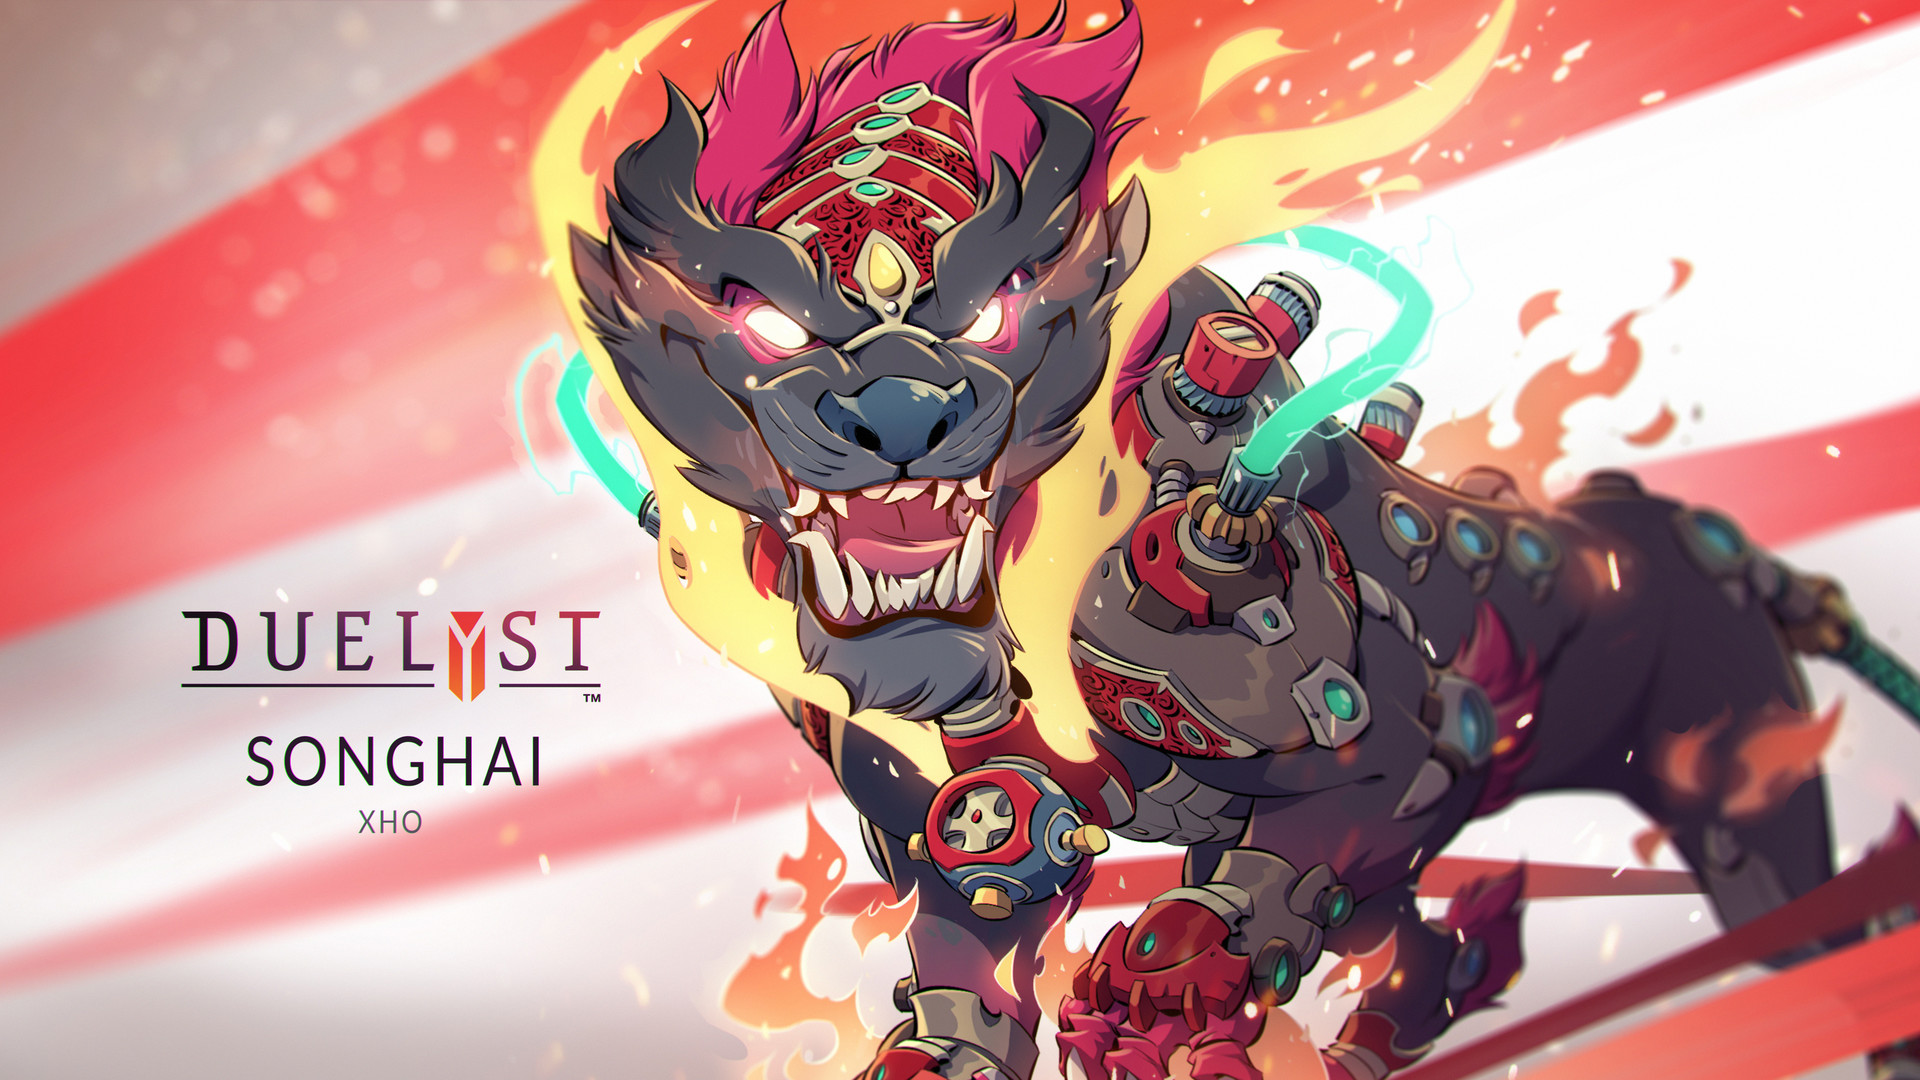 Duelyst Has Some Of The Best Character Art You’ll See